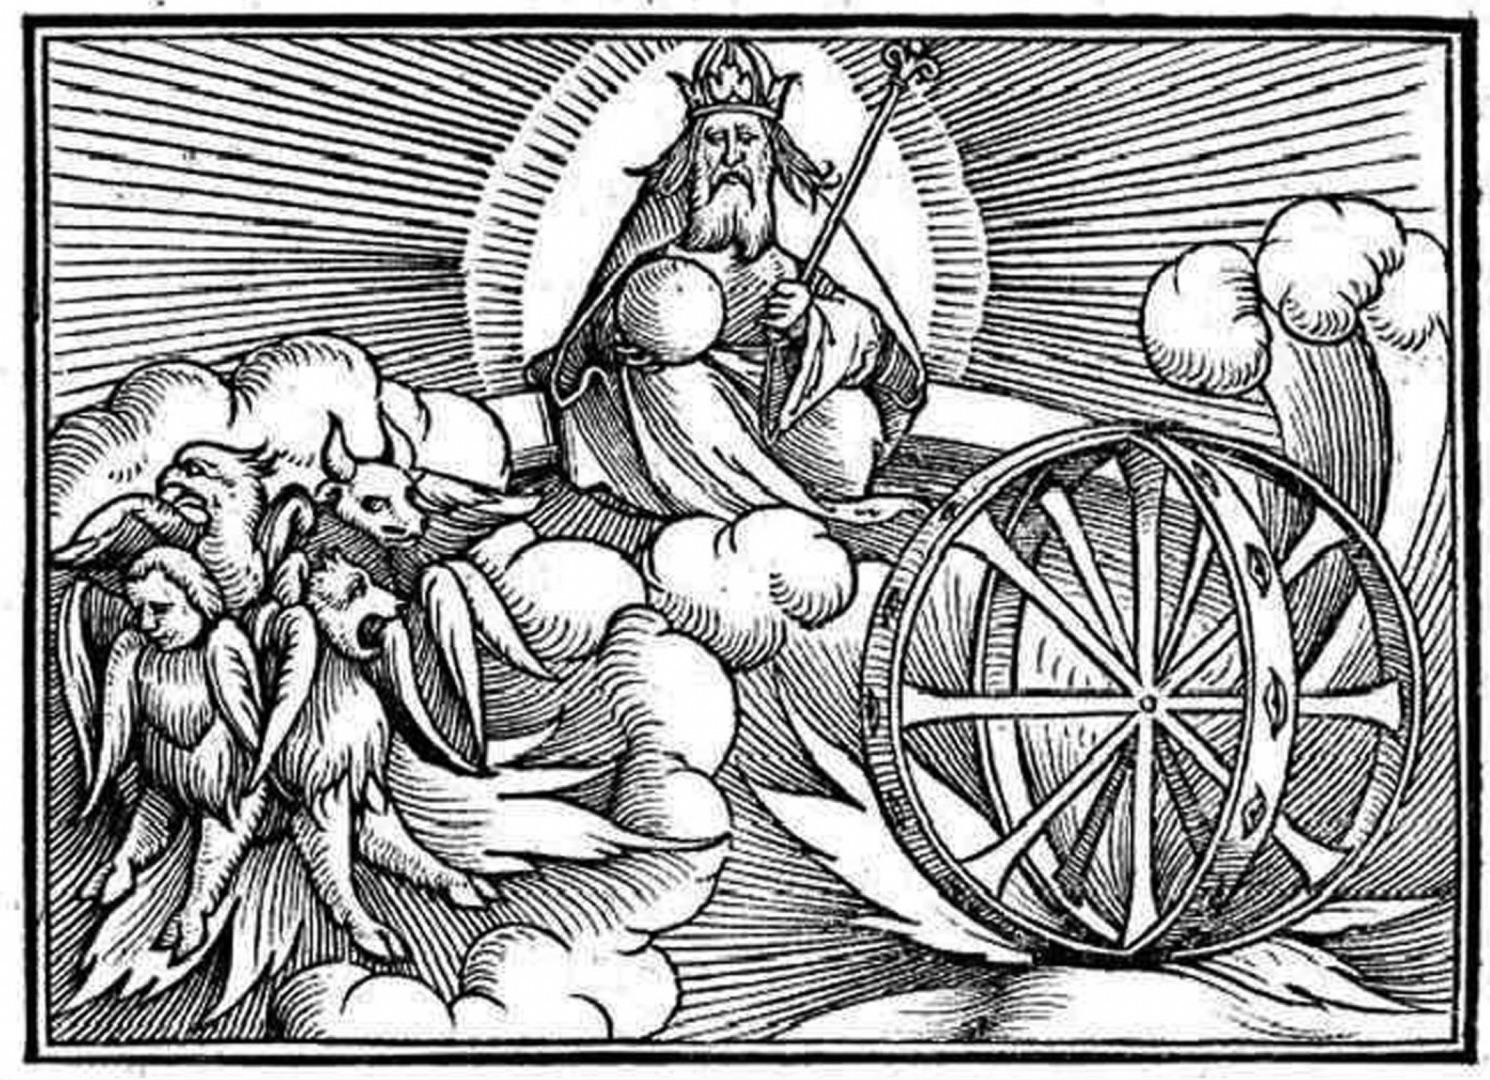 Hans Holbein the Younger, Ezekiel’s vision of God, the four living creatures, and a wheel within a wheel, published in Historiarum veteris instrumenti icones ad vivum expressae (1538).